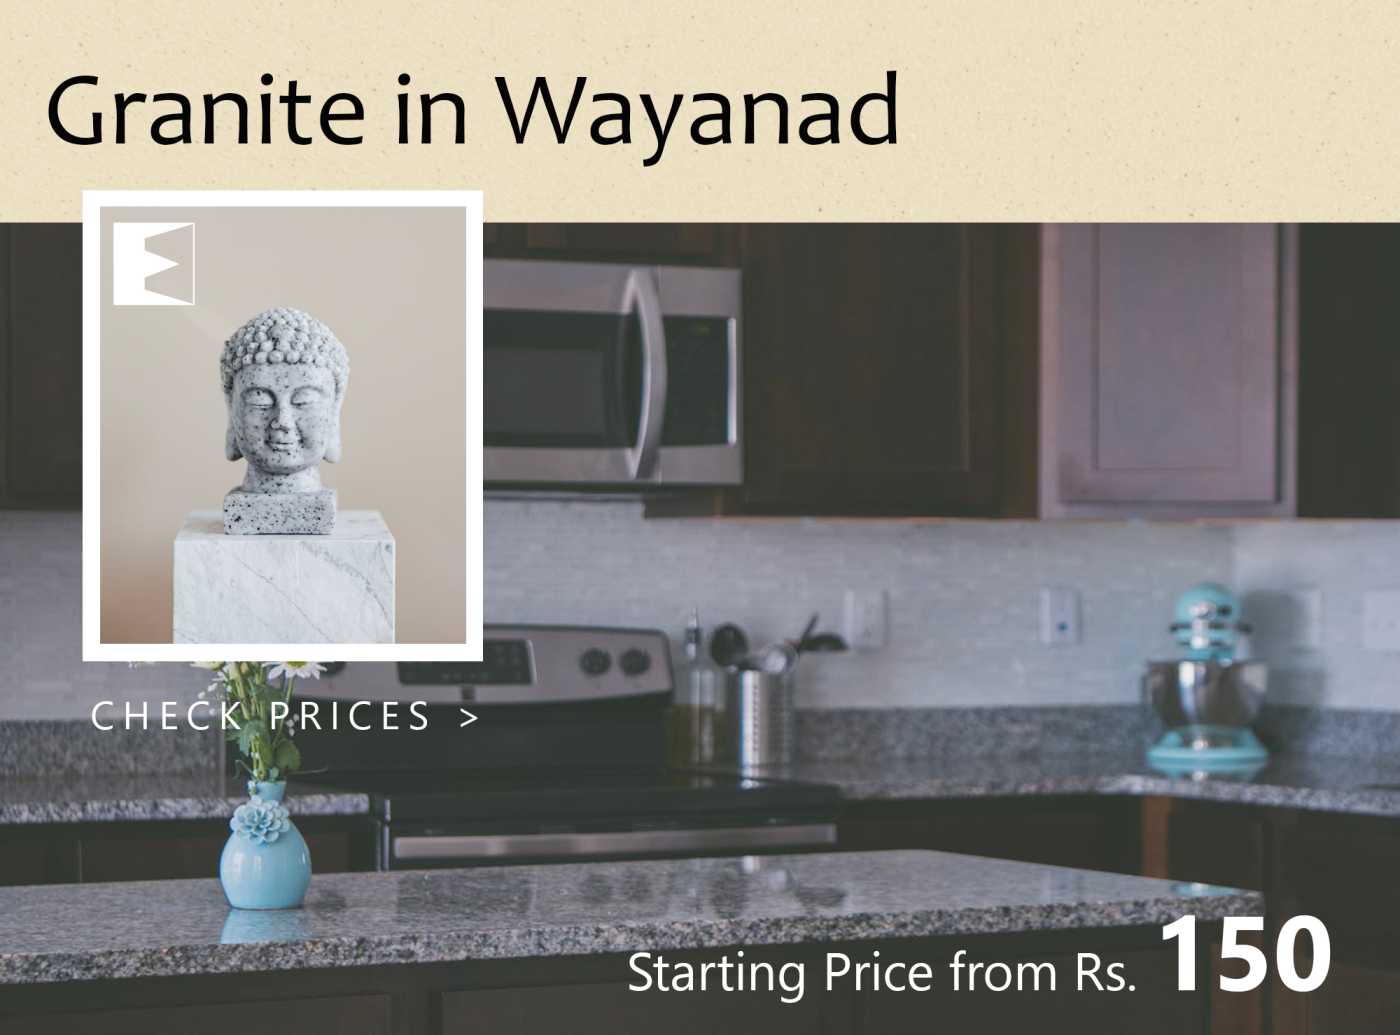 Granite Price in Wayanad | Starting from 150 INR